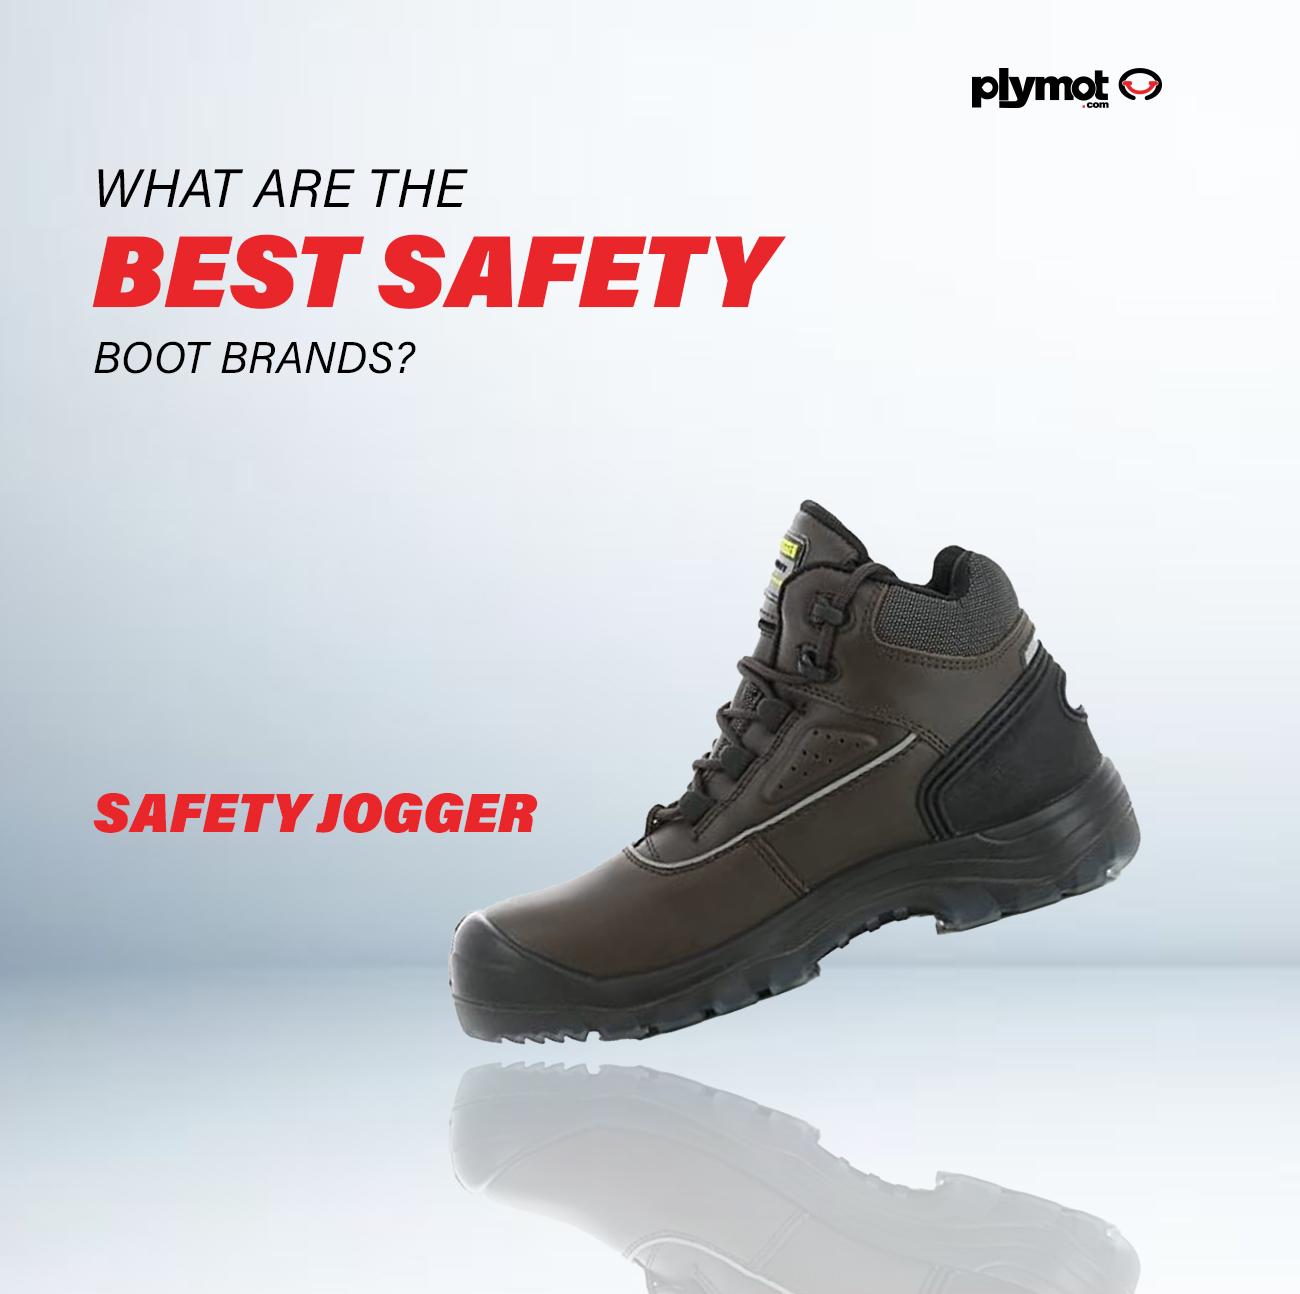 Safety Jogger safety boot brand